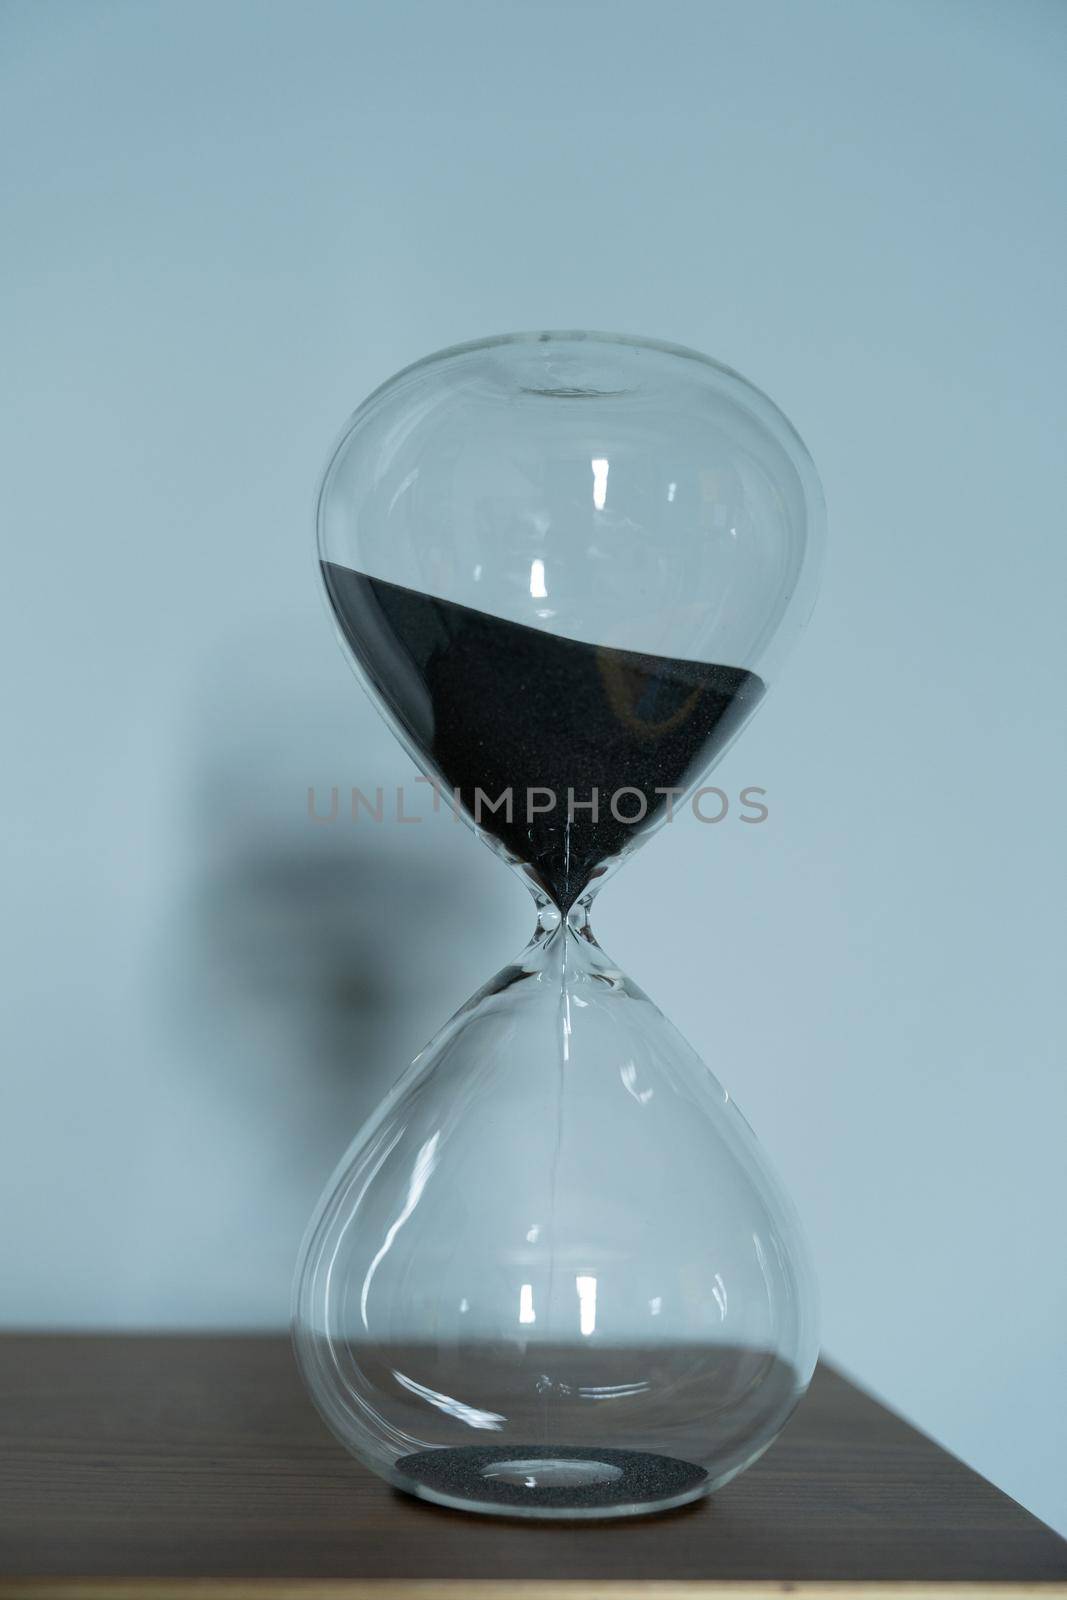 Black sand running through the bulbs of hourglass measuring the passing time in a countdown to a business deadline, urgency and running out of time on a blue background with copy space.